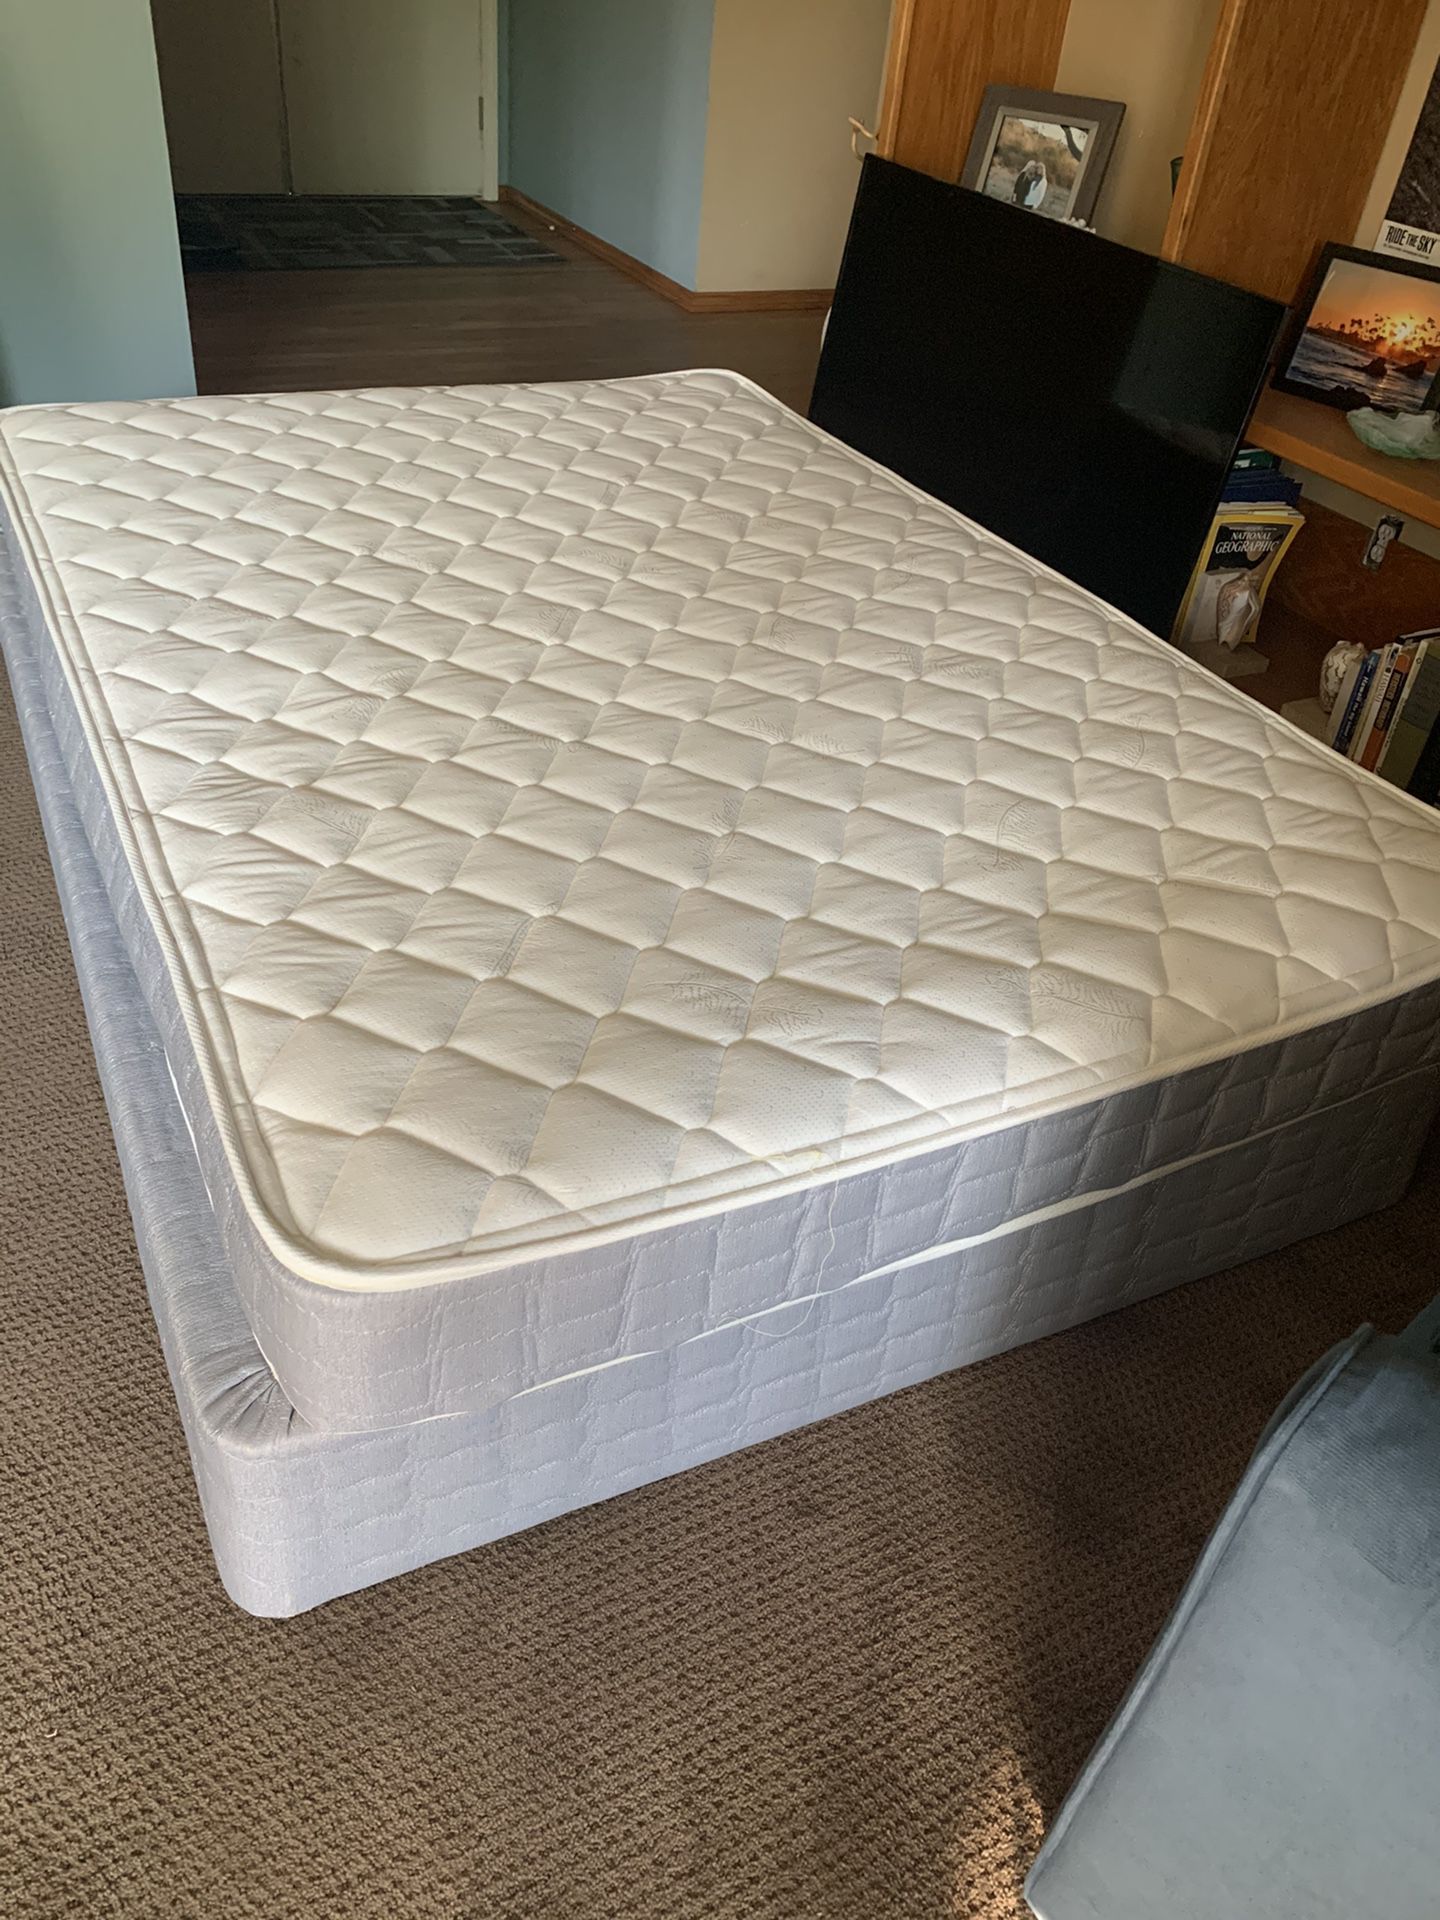 Basic Full Size Mattress and box spring, fairly new, no stains!